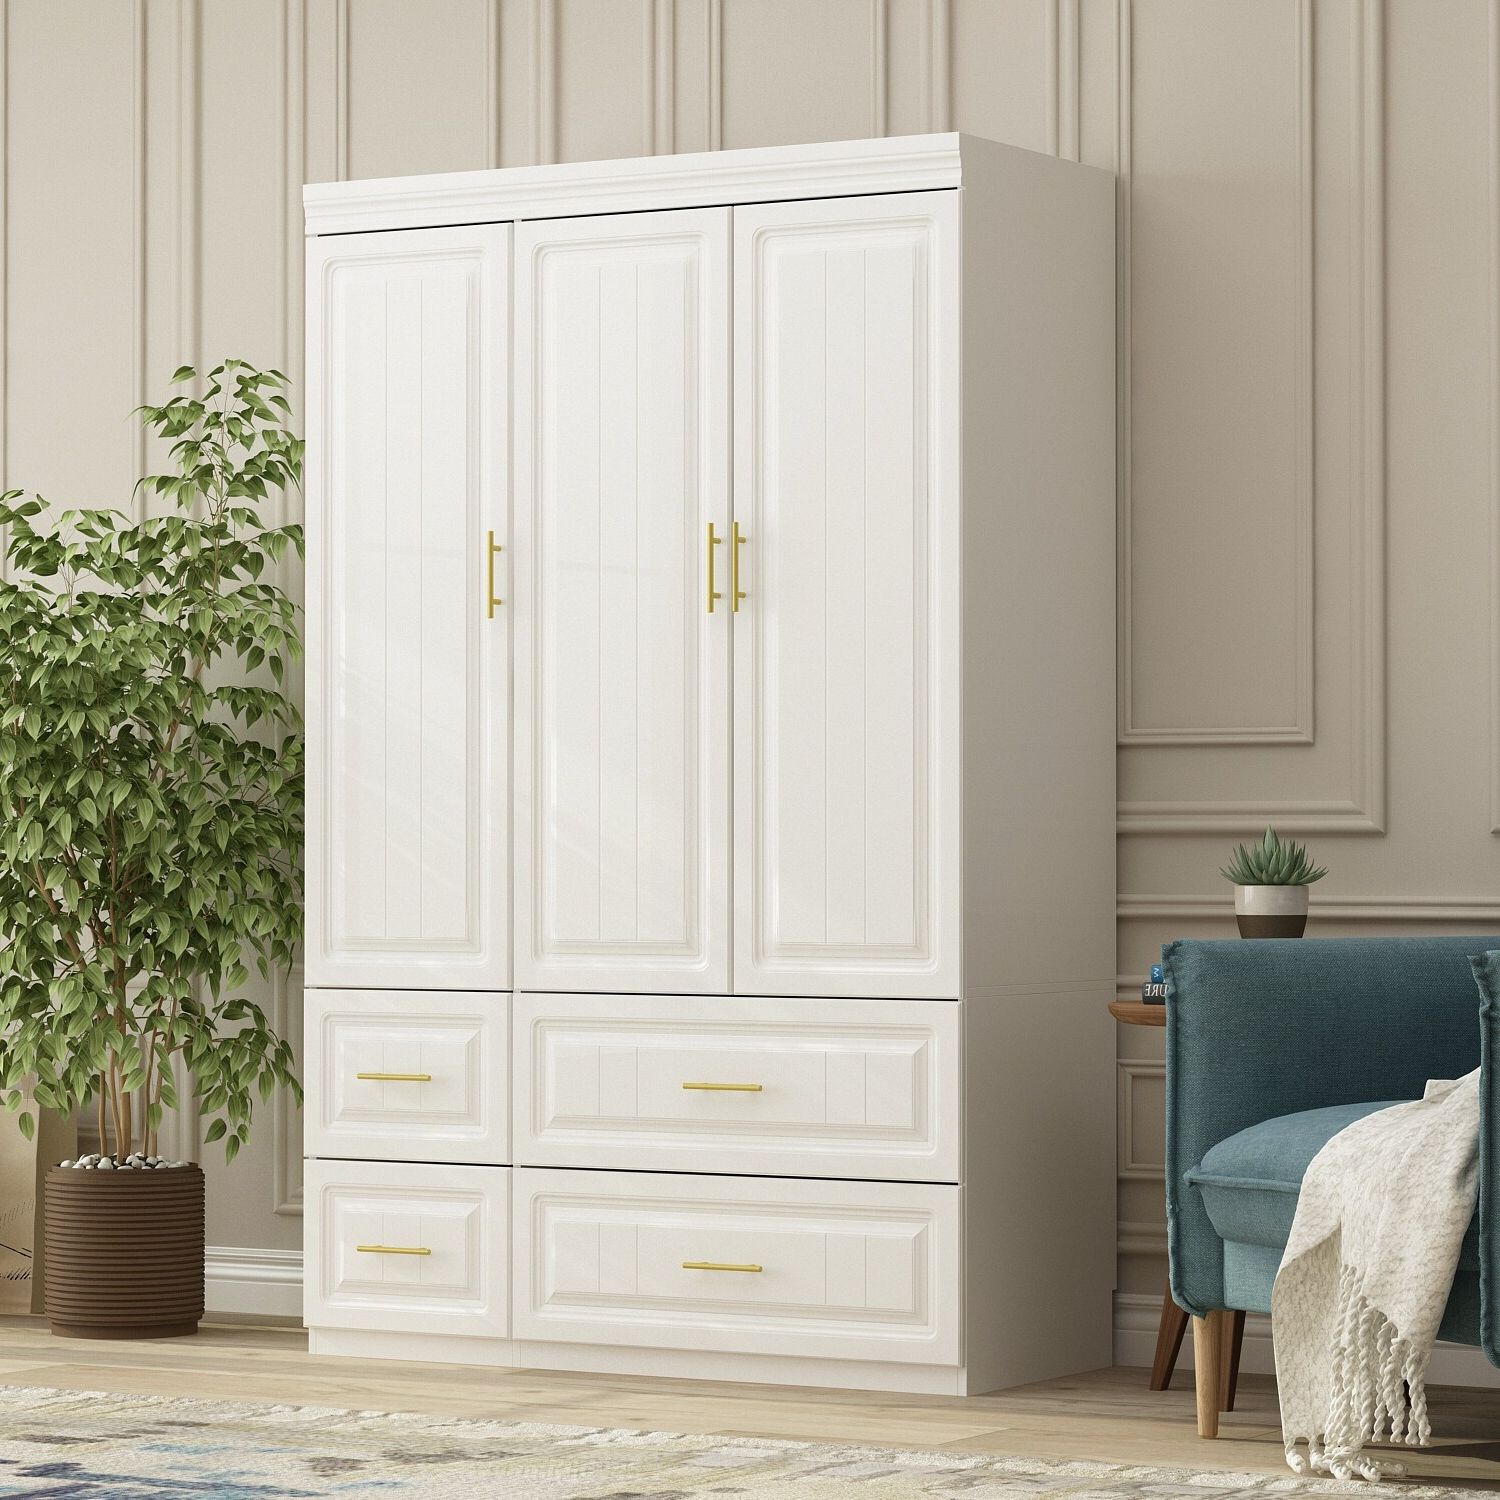 Fufu&gaga Large Armoire Combo Wardrobes Closet Storage Cabinet White – On  Sale – Bed Bath & Beyond – 36502870 Inside Wardrobes And Drawers Combo (View 9 of 20)